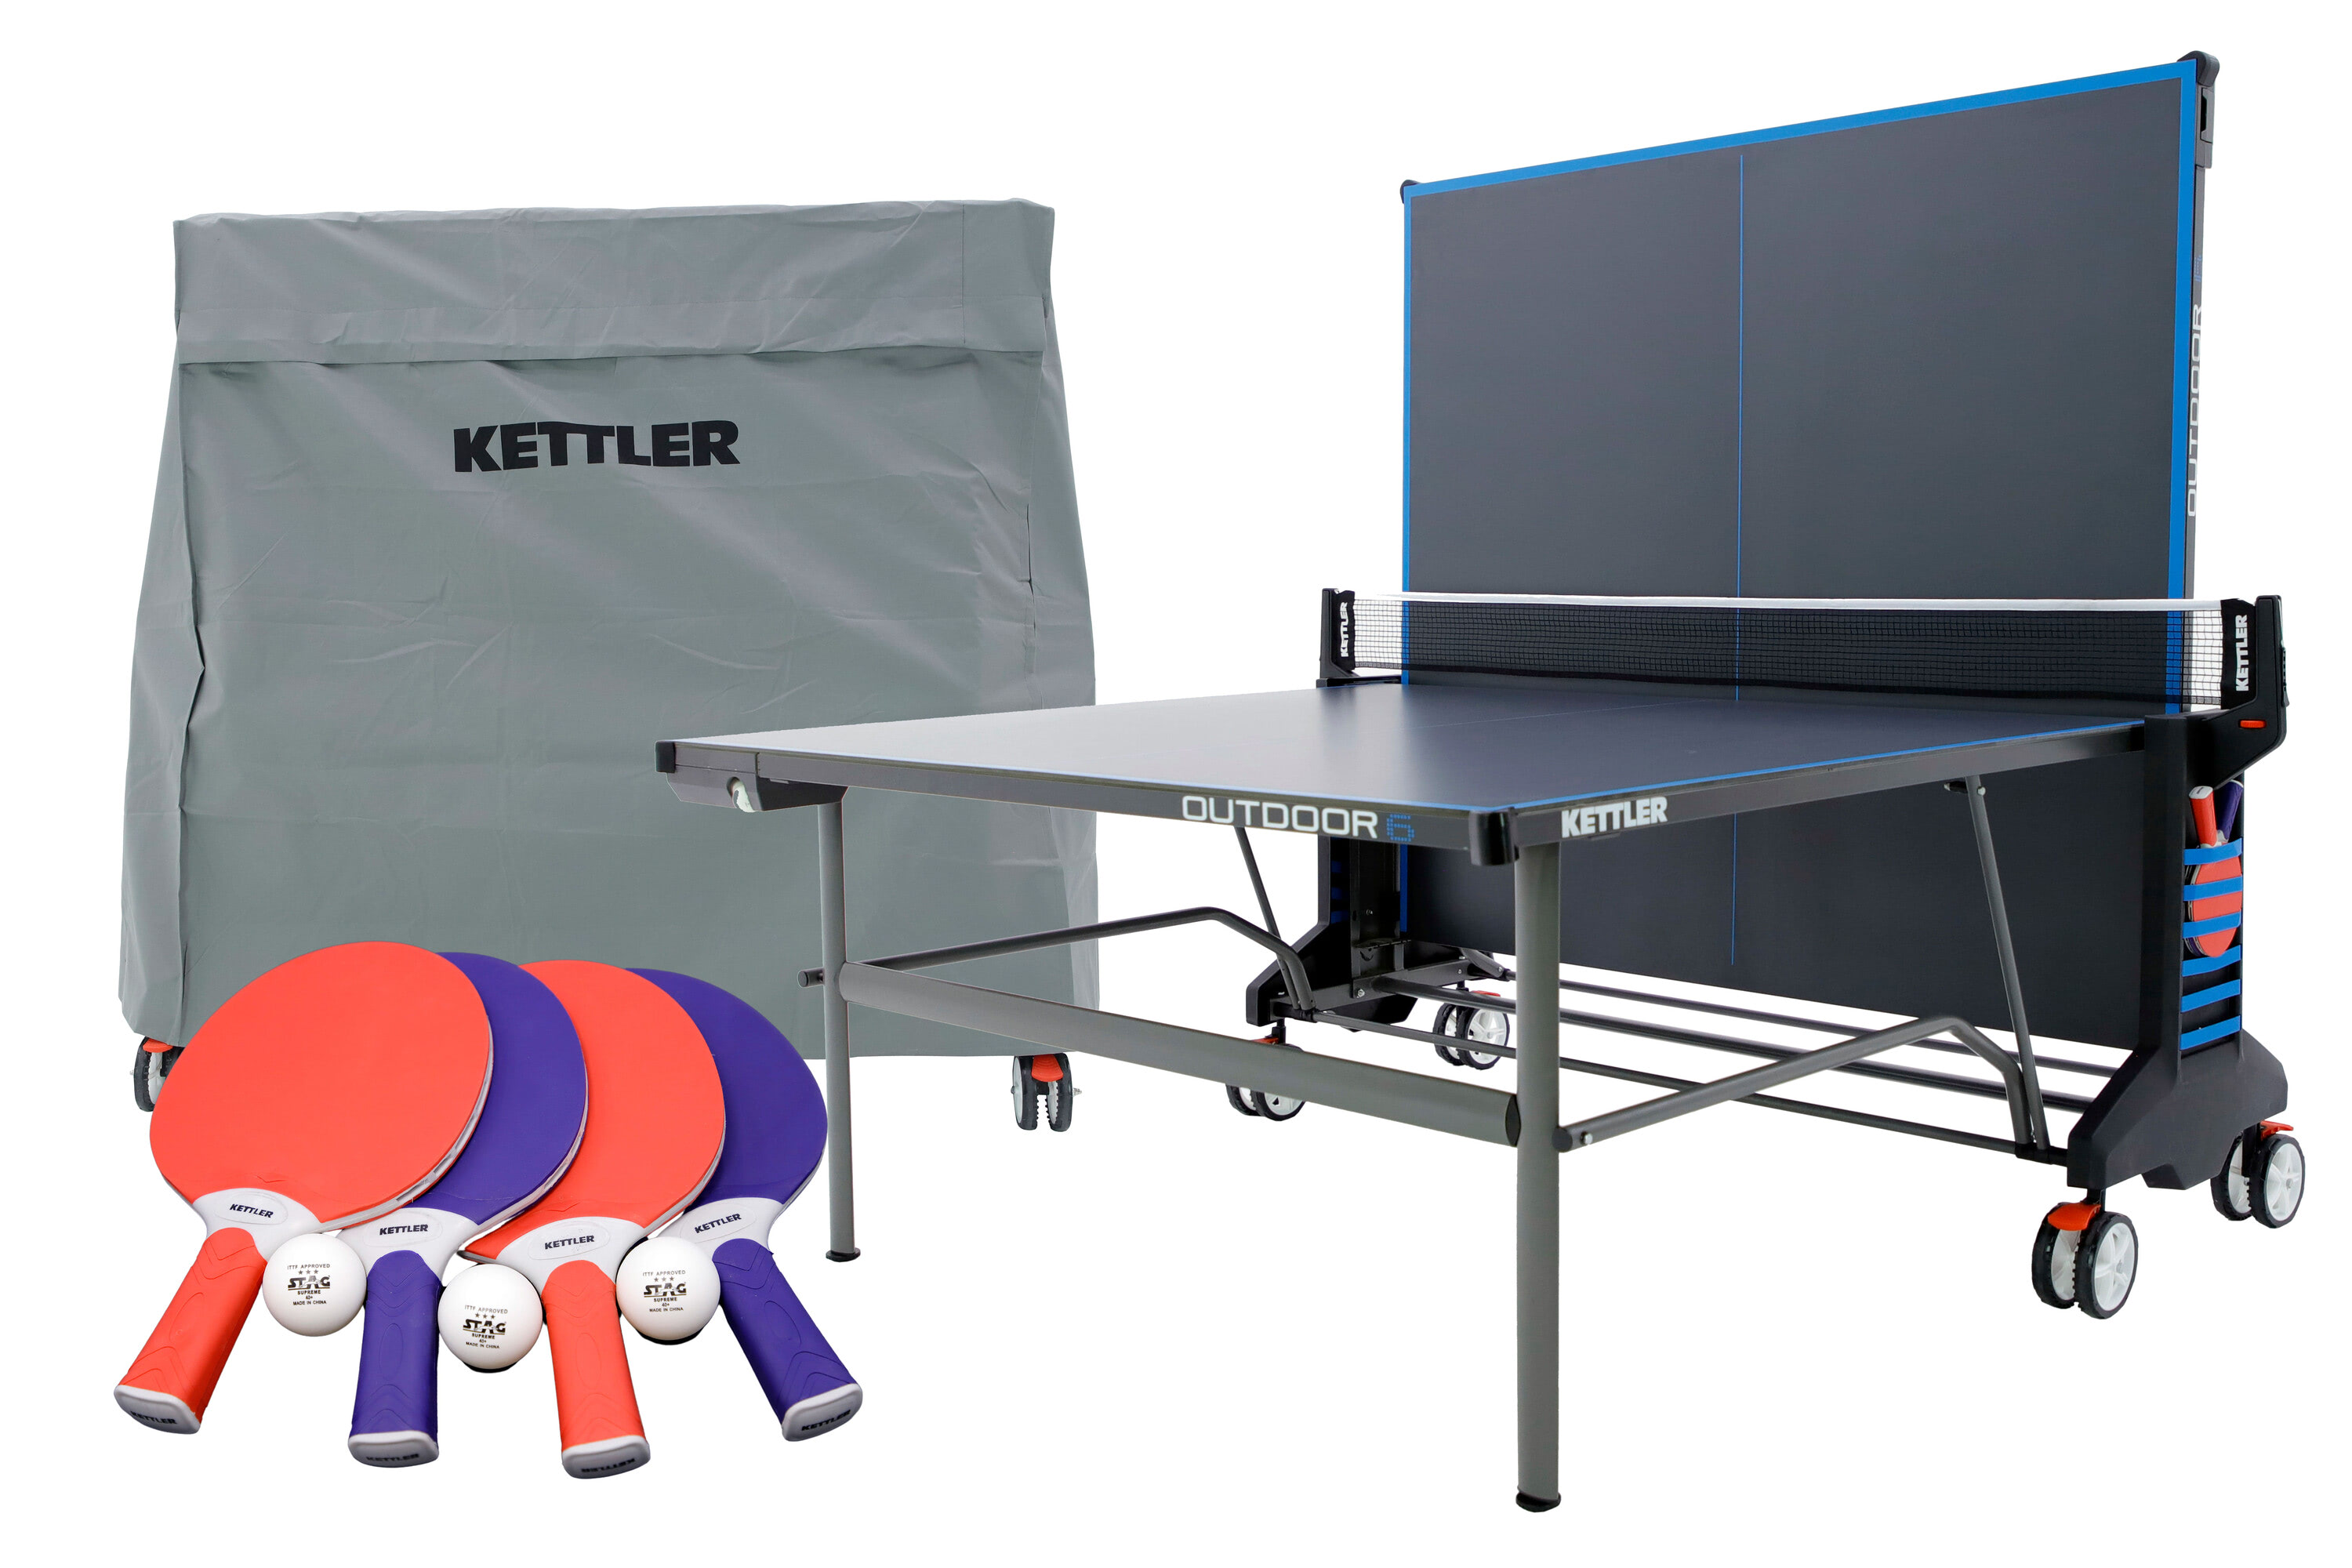 KETTLER Outdoor 6 Bundle w/4-Racket Set, Balls and Table Cover